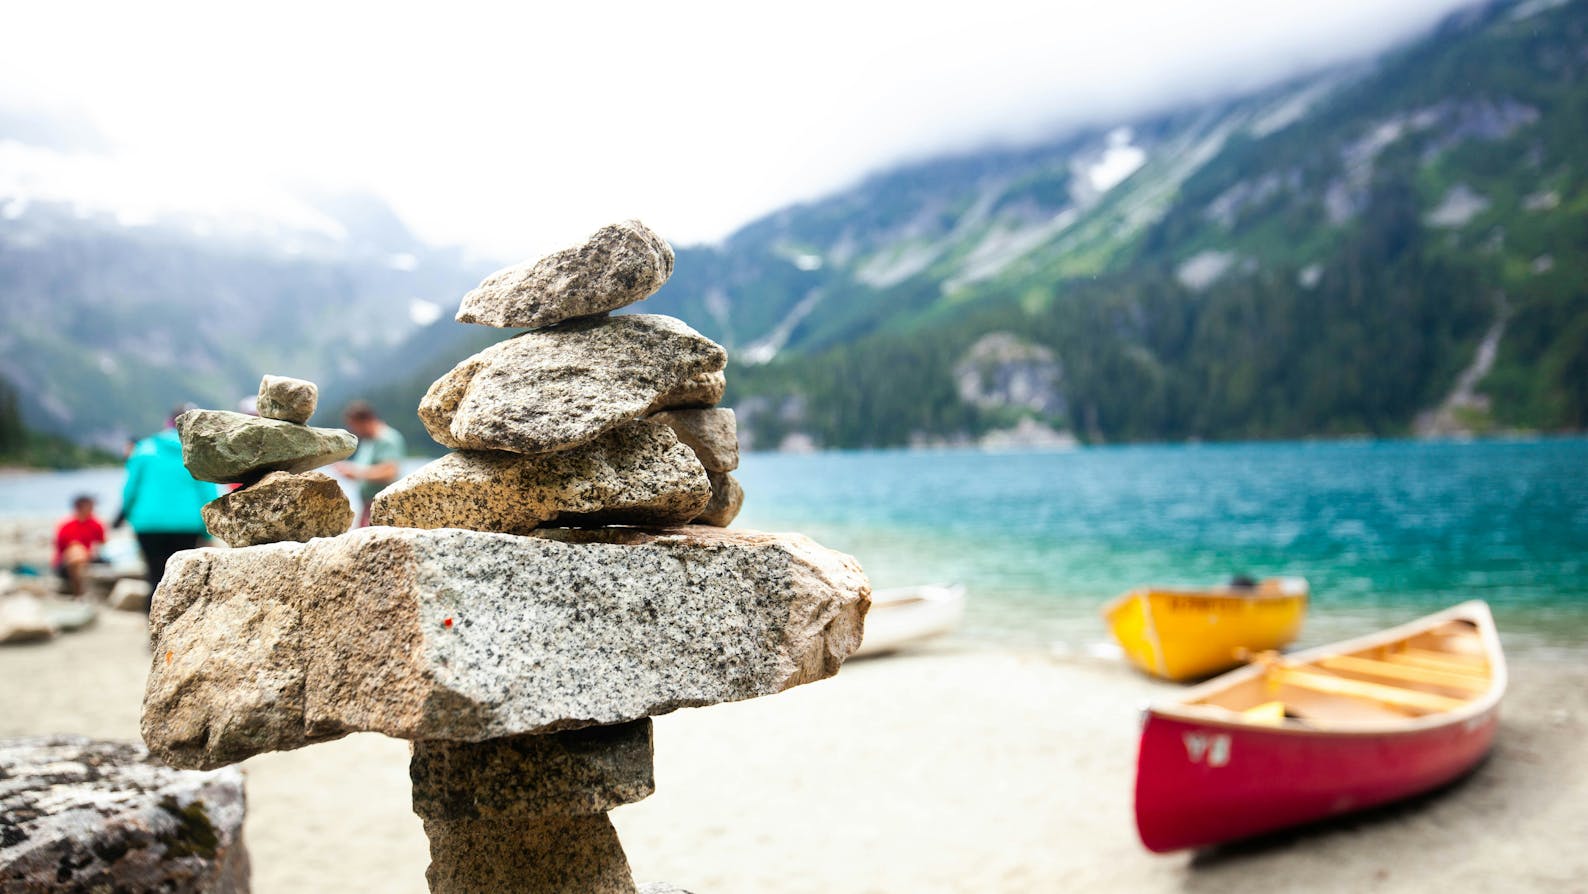 Selective focus photo of inukshuk against blue mountain lake with canoes in background